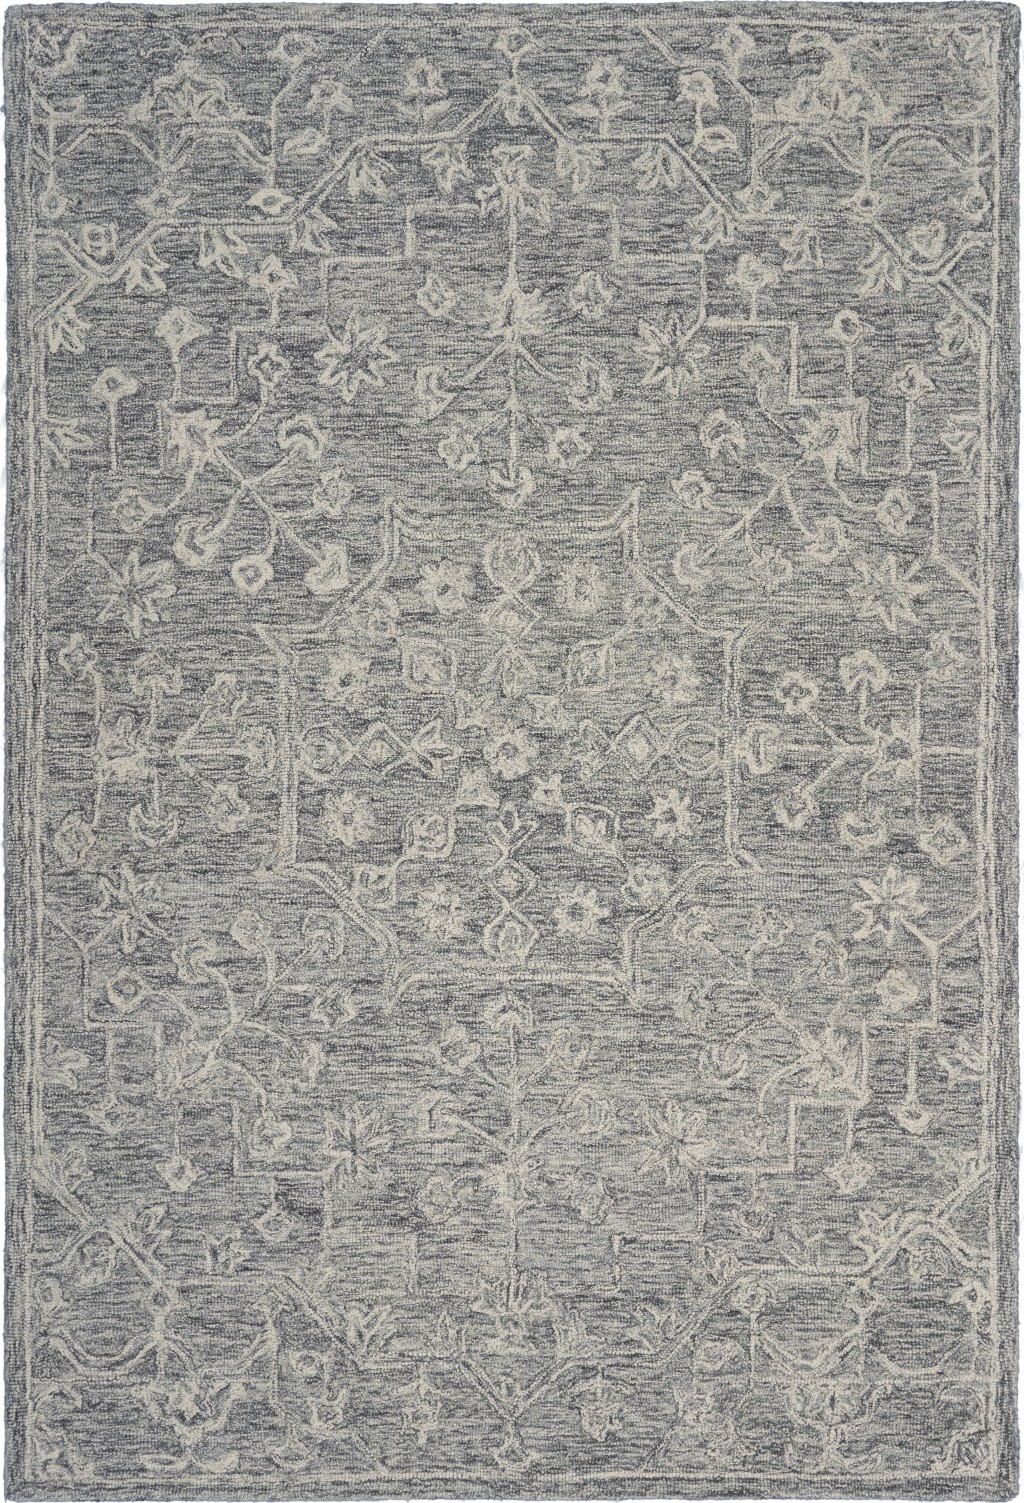 7’ x 9’ Gray Floral Finesse Area Rug-395788-1